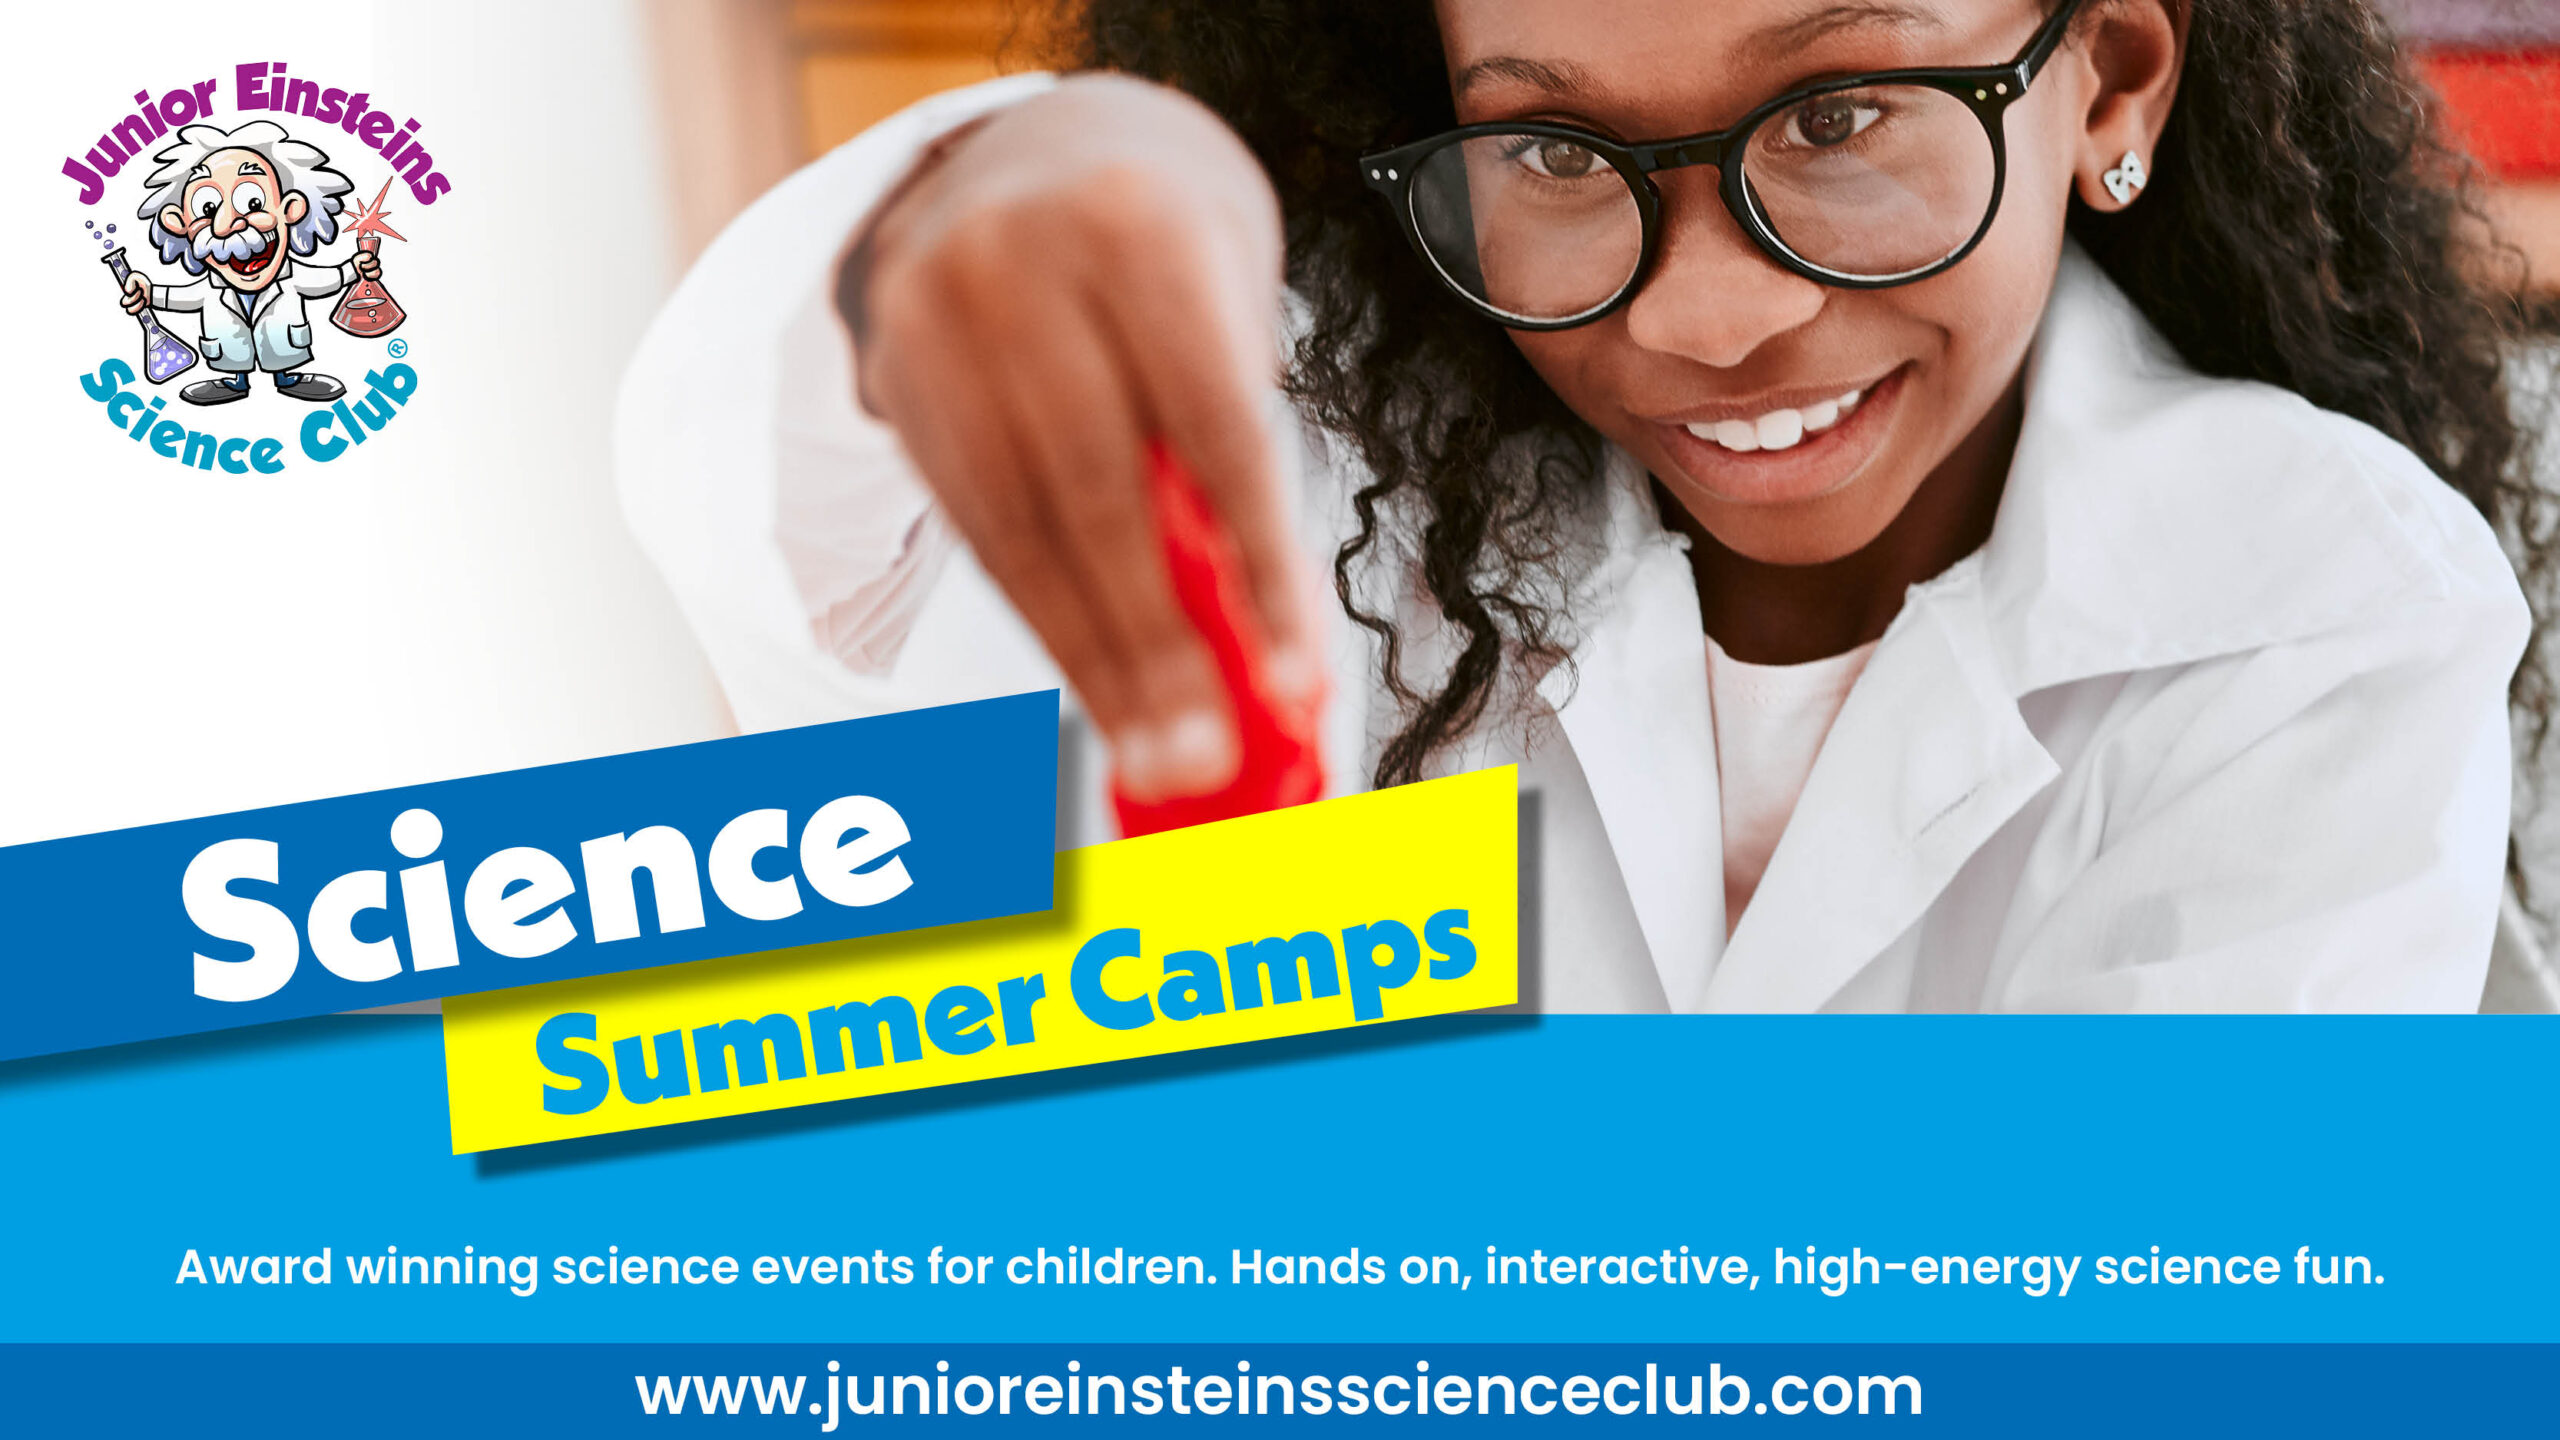 Science Summer Camps fo children